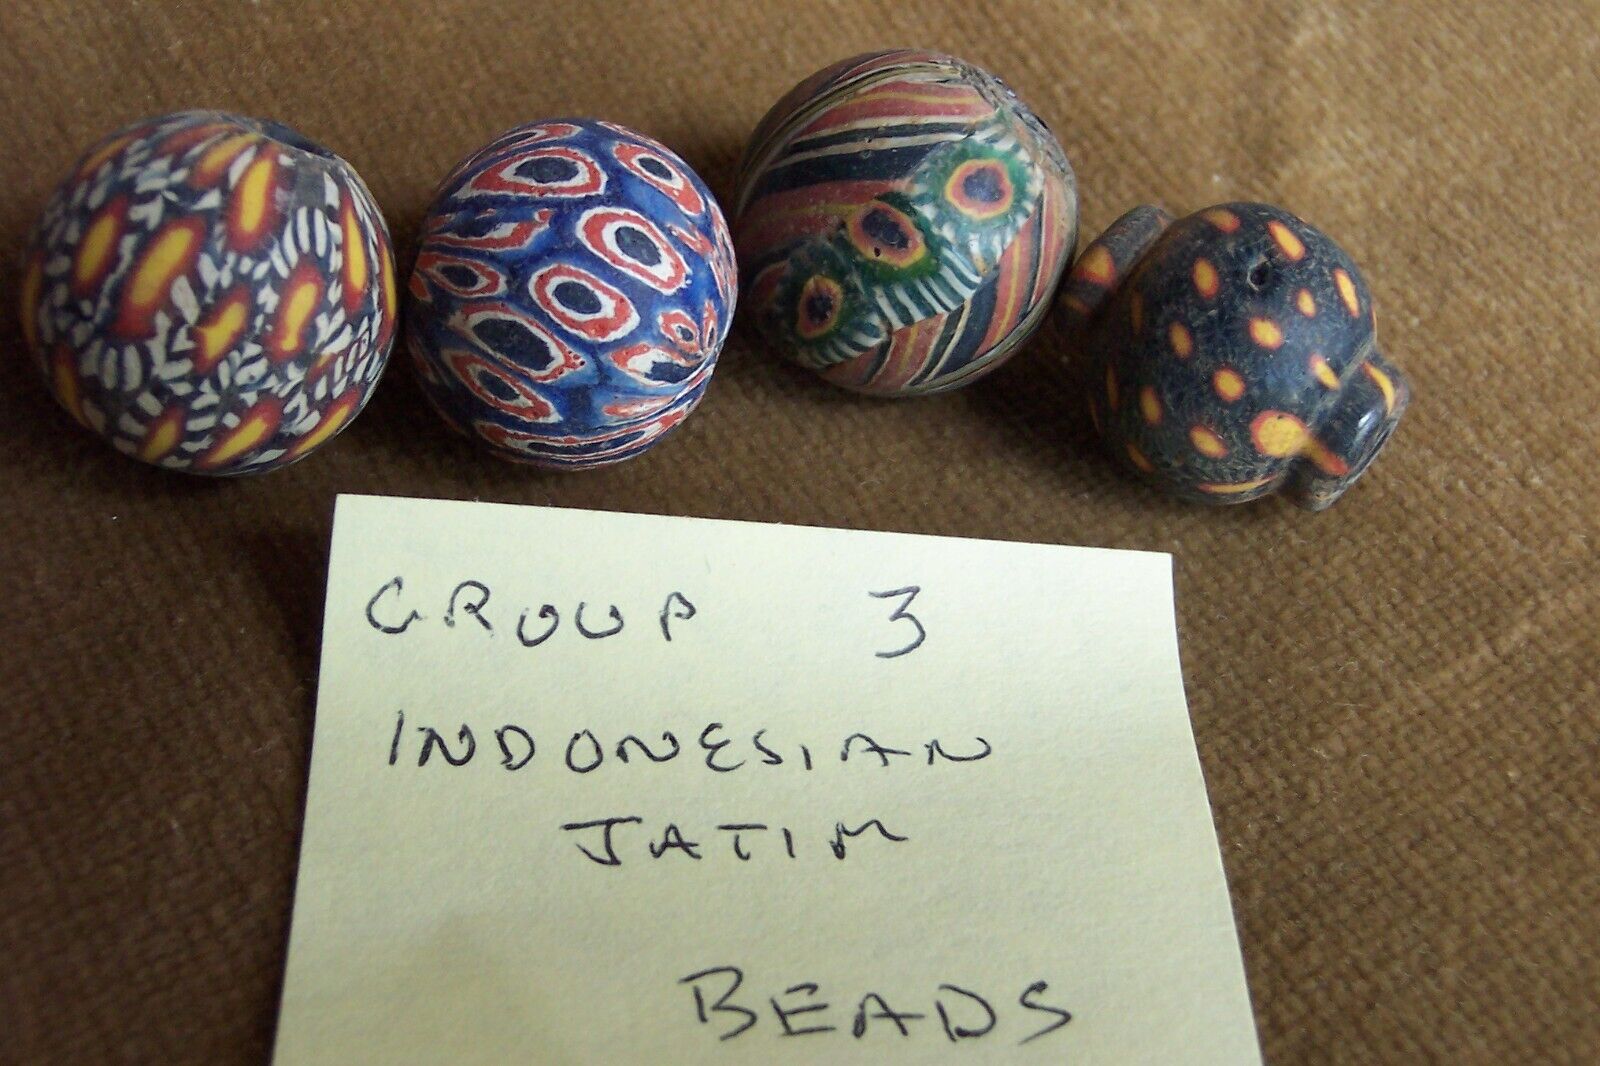 4 antique beads from Java/ Indonesia-Jatim- mosaic glass-(group 3)